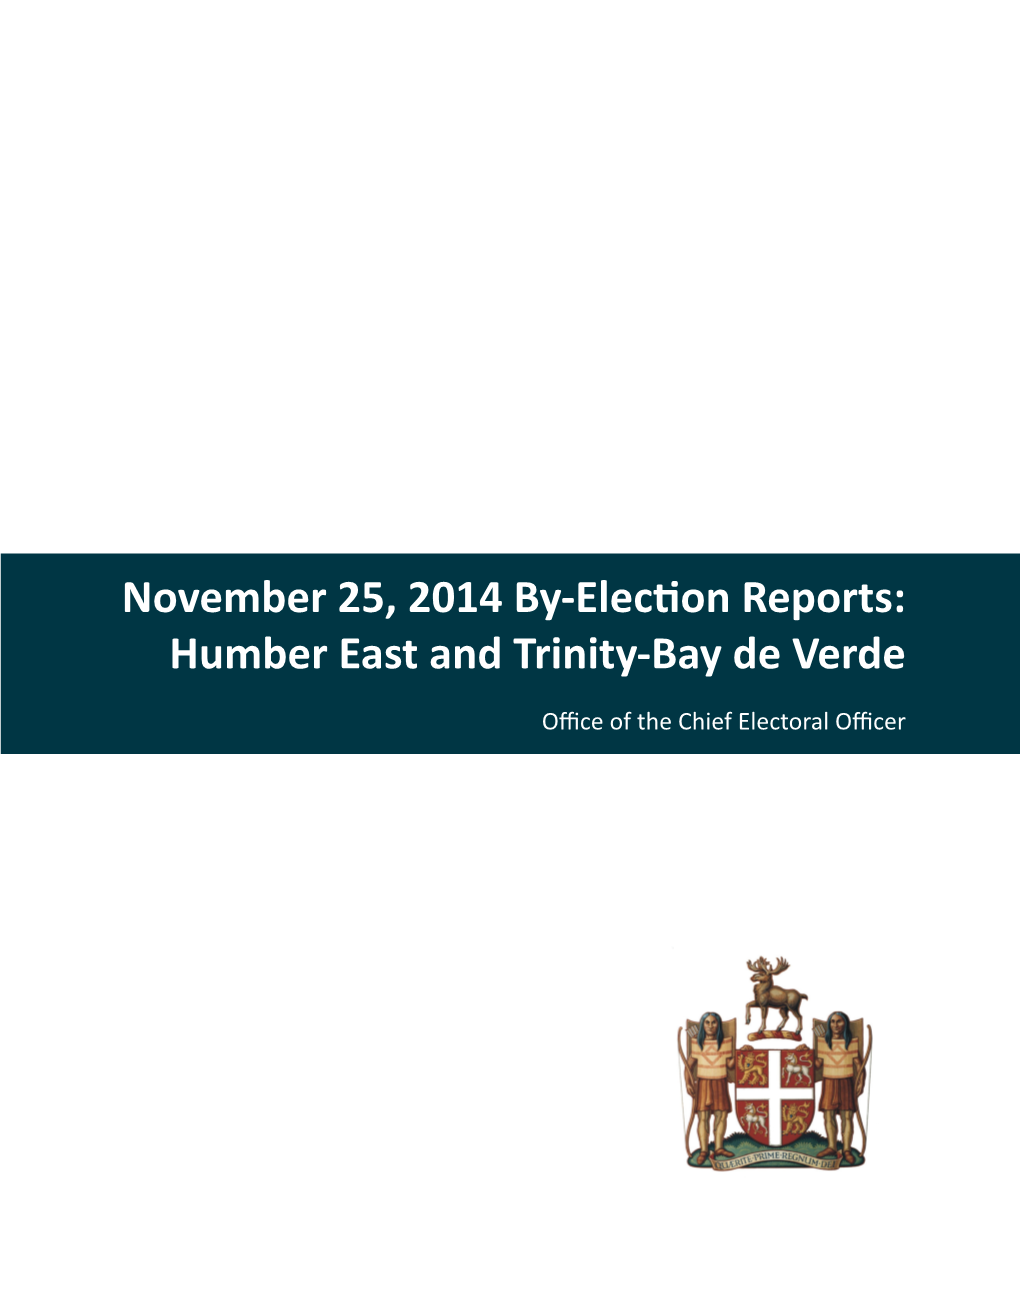 November 25, 2014 By-Election Reports: Humber East and Trinity-Bay De Verde